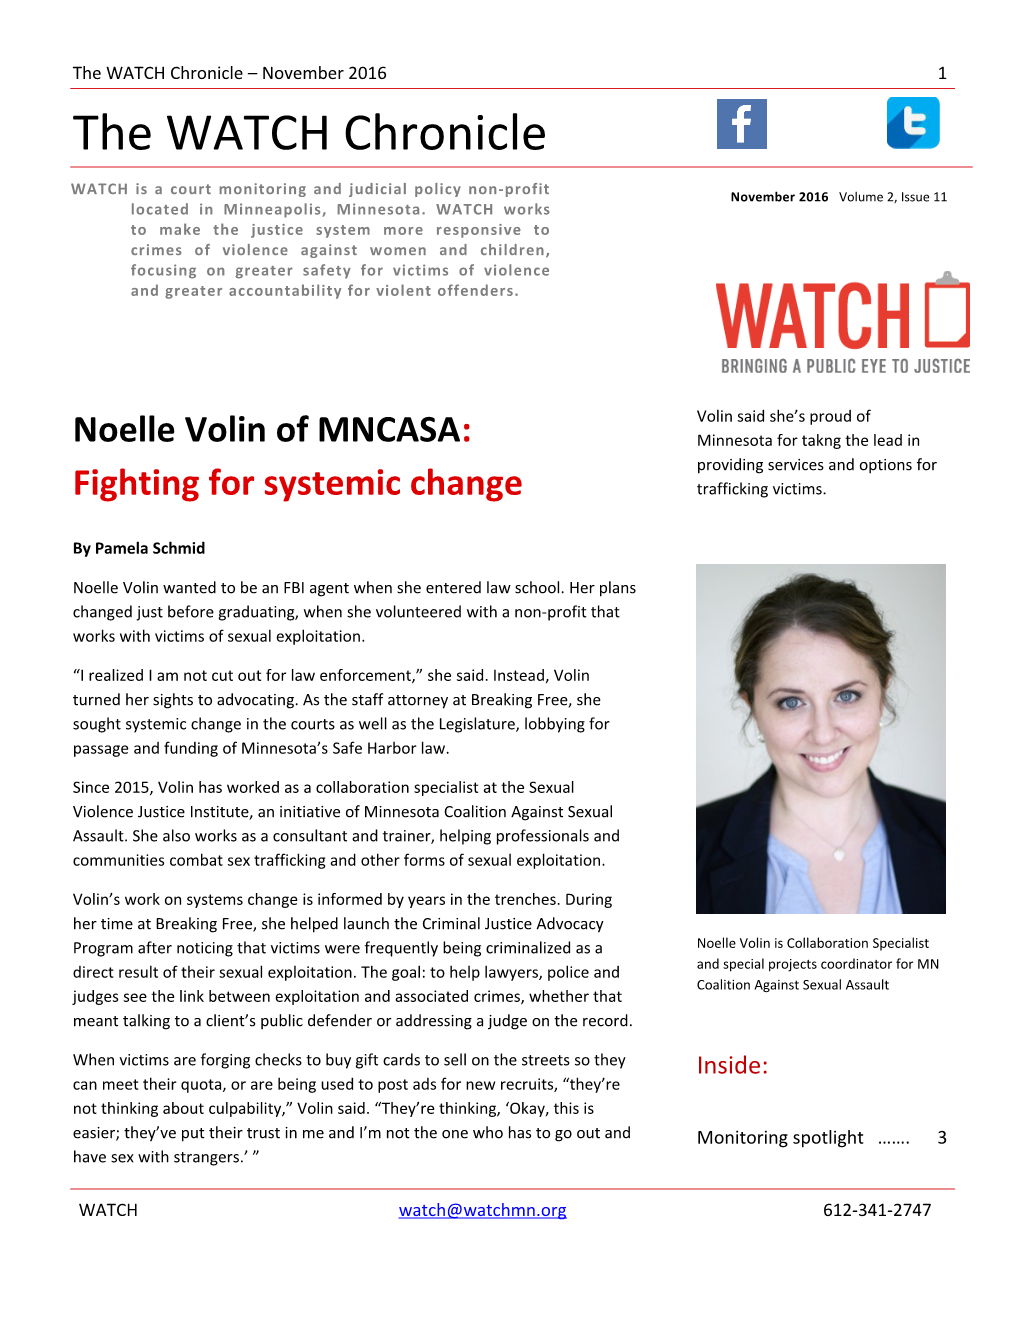 Noelle Volin of MNCASA: Fighting for Systemic Change